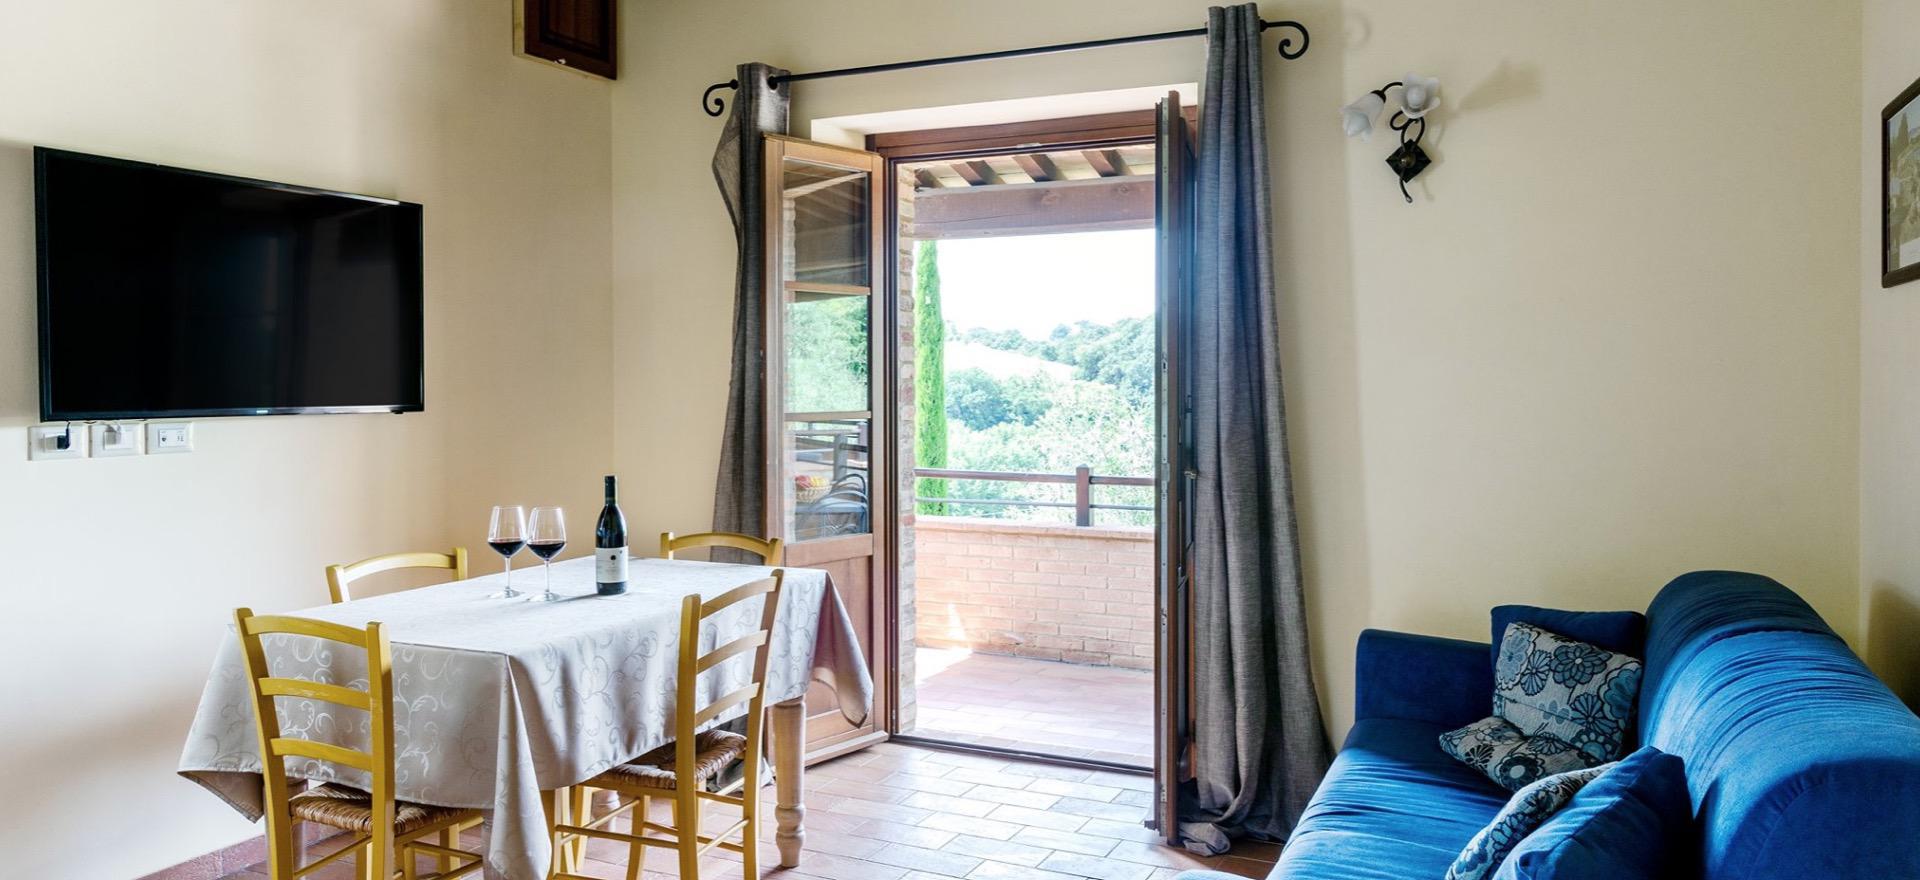 Agriturismo Umbria Agriturismo between Tuscany and Umbria, within walking distance of a village